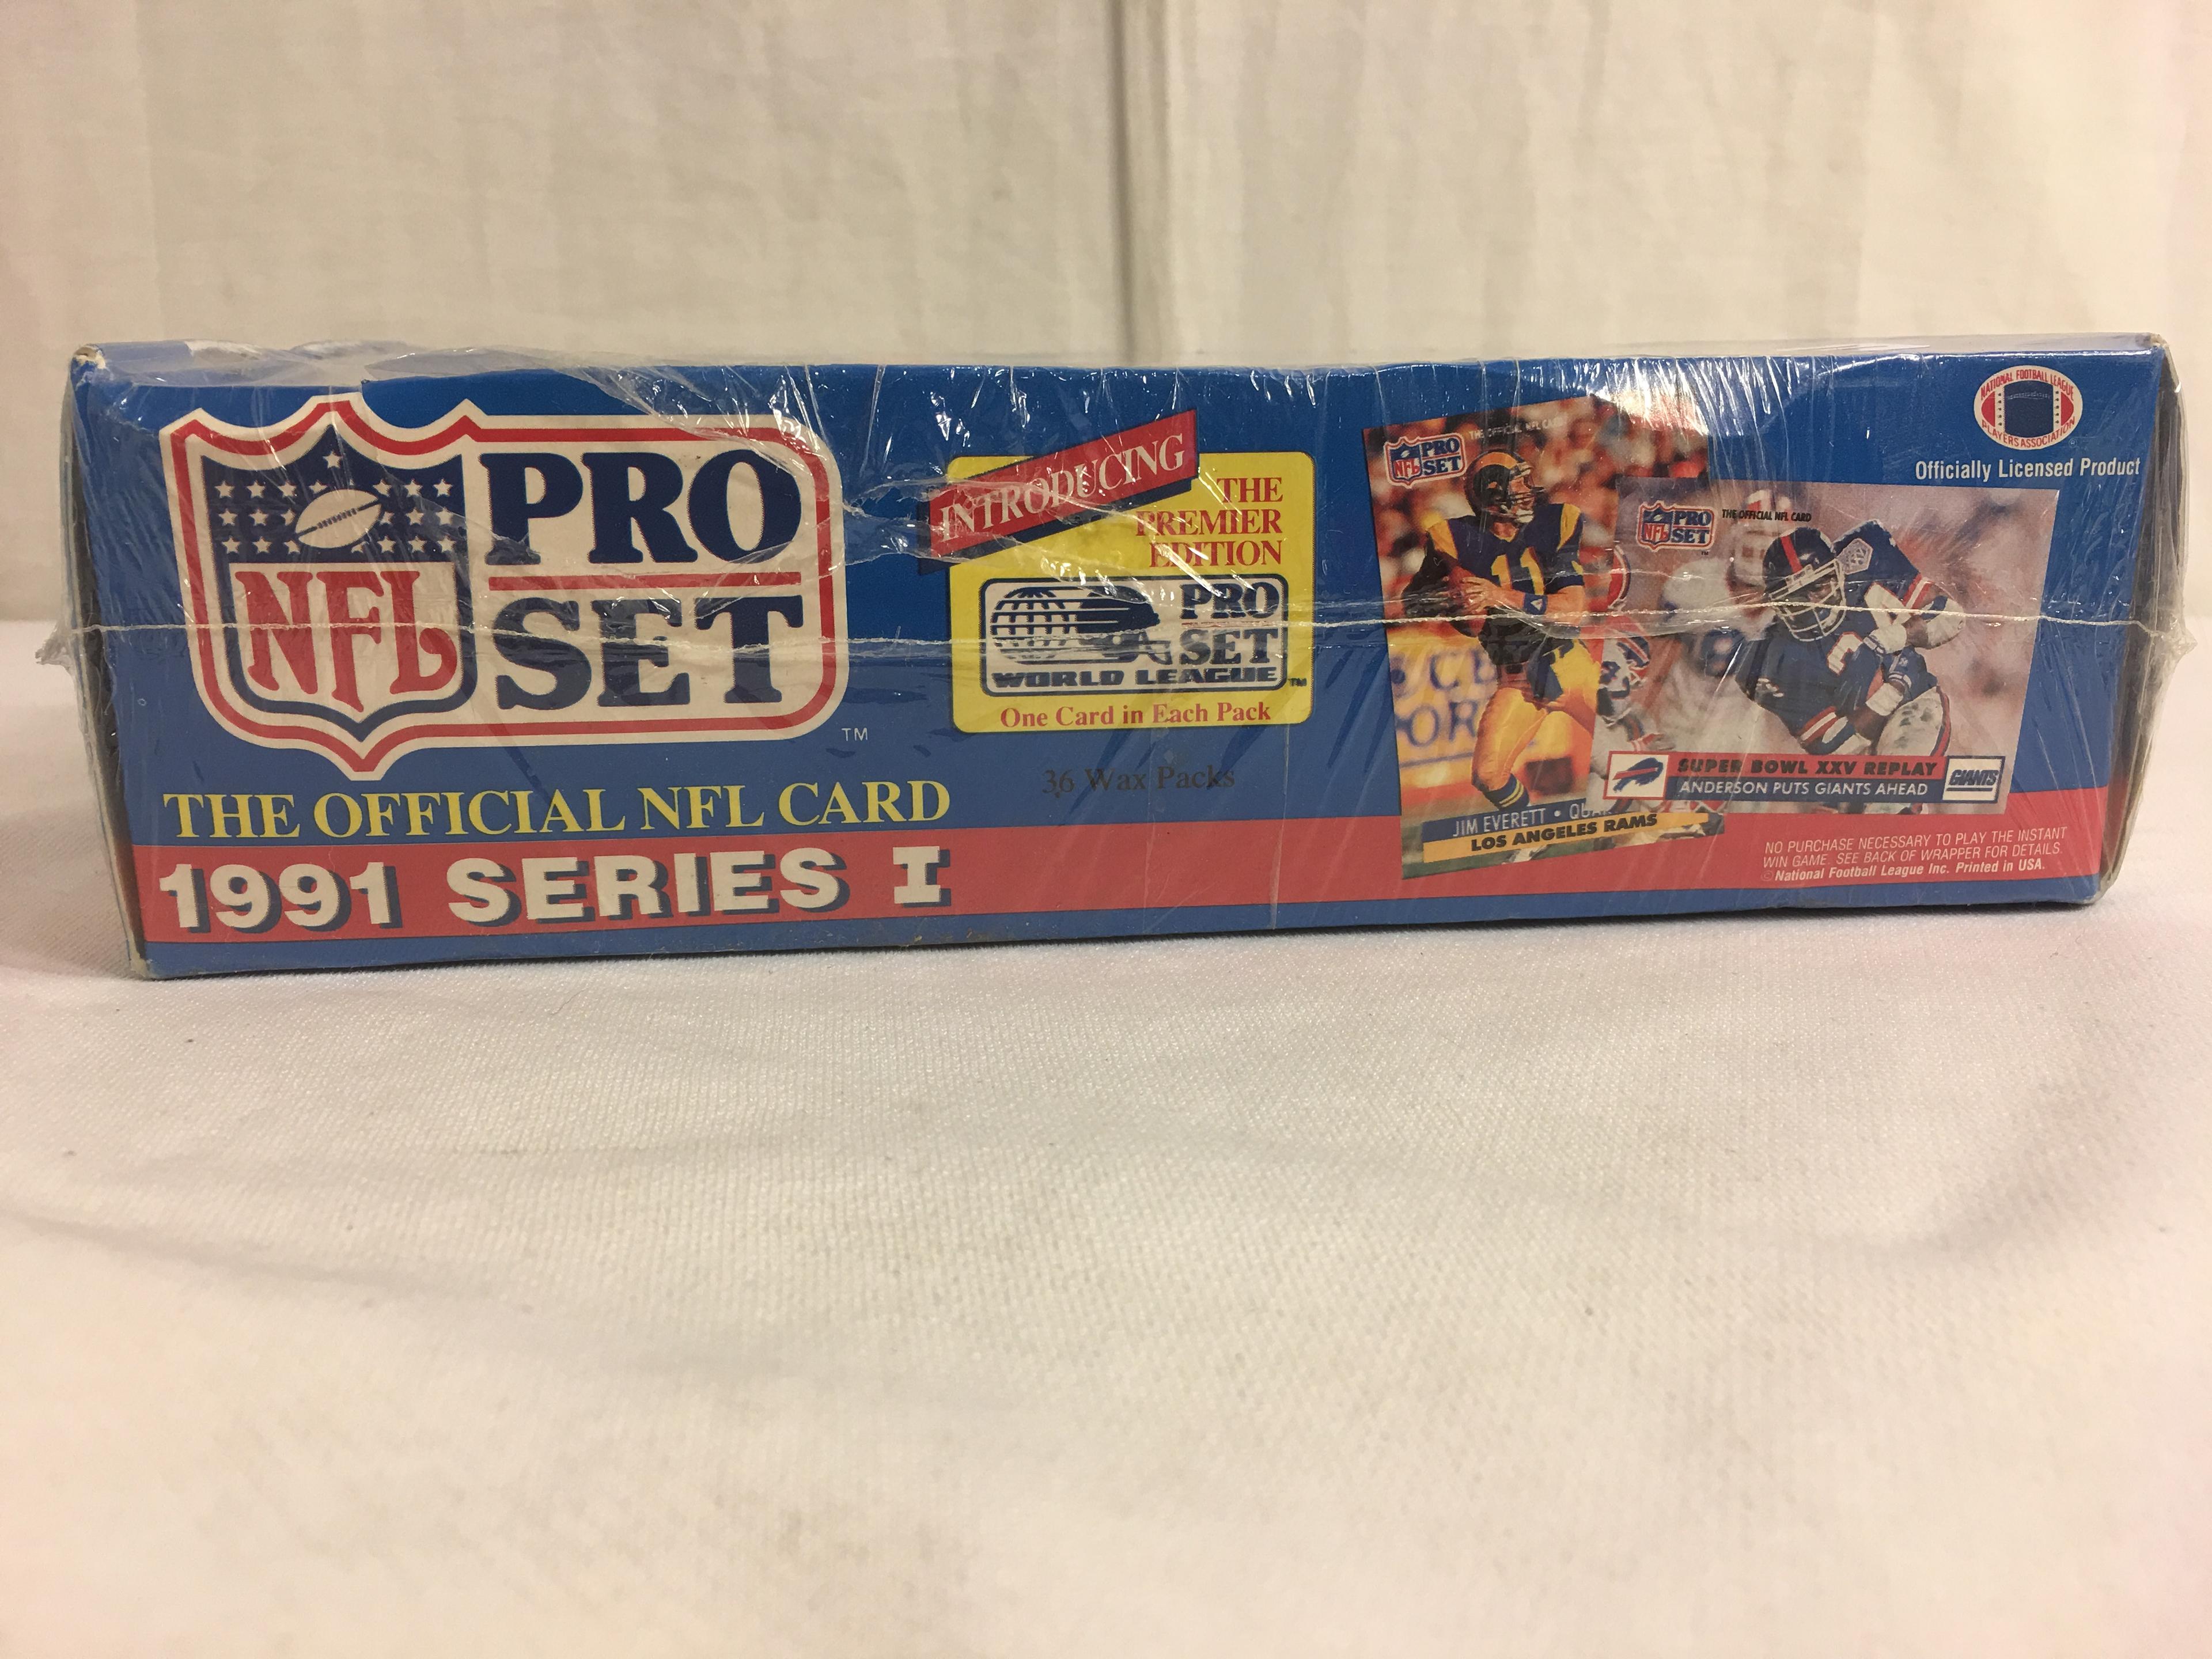 New Sealed in Box - Pro NFL Set The Official NFL Card 1991 Series I Trading Sport Cards